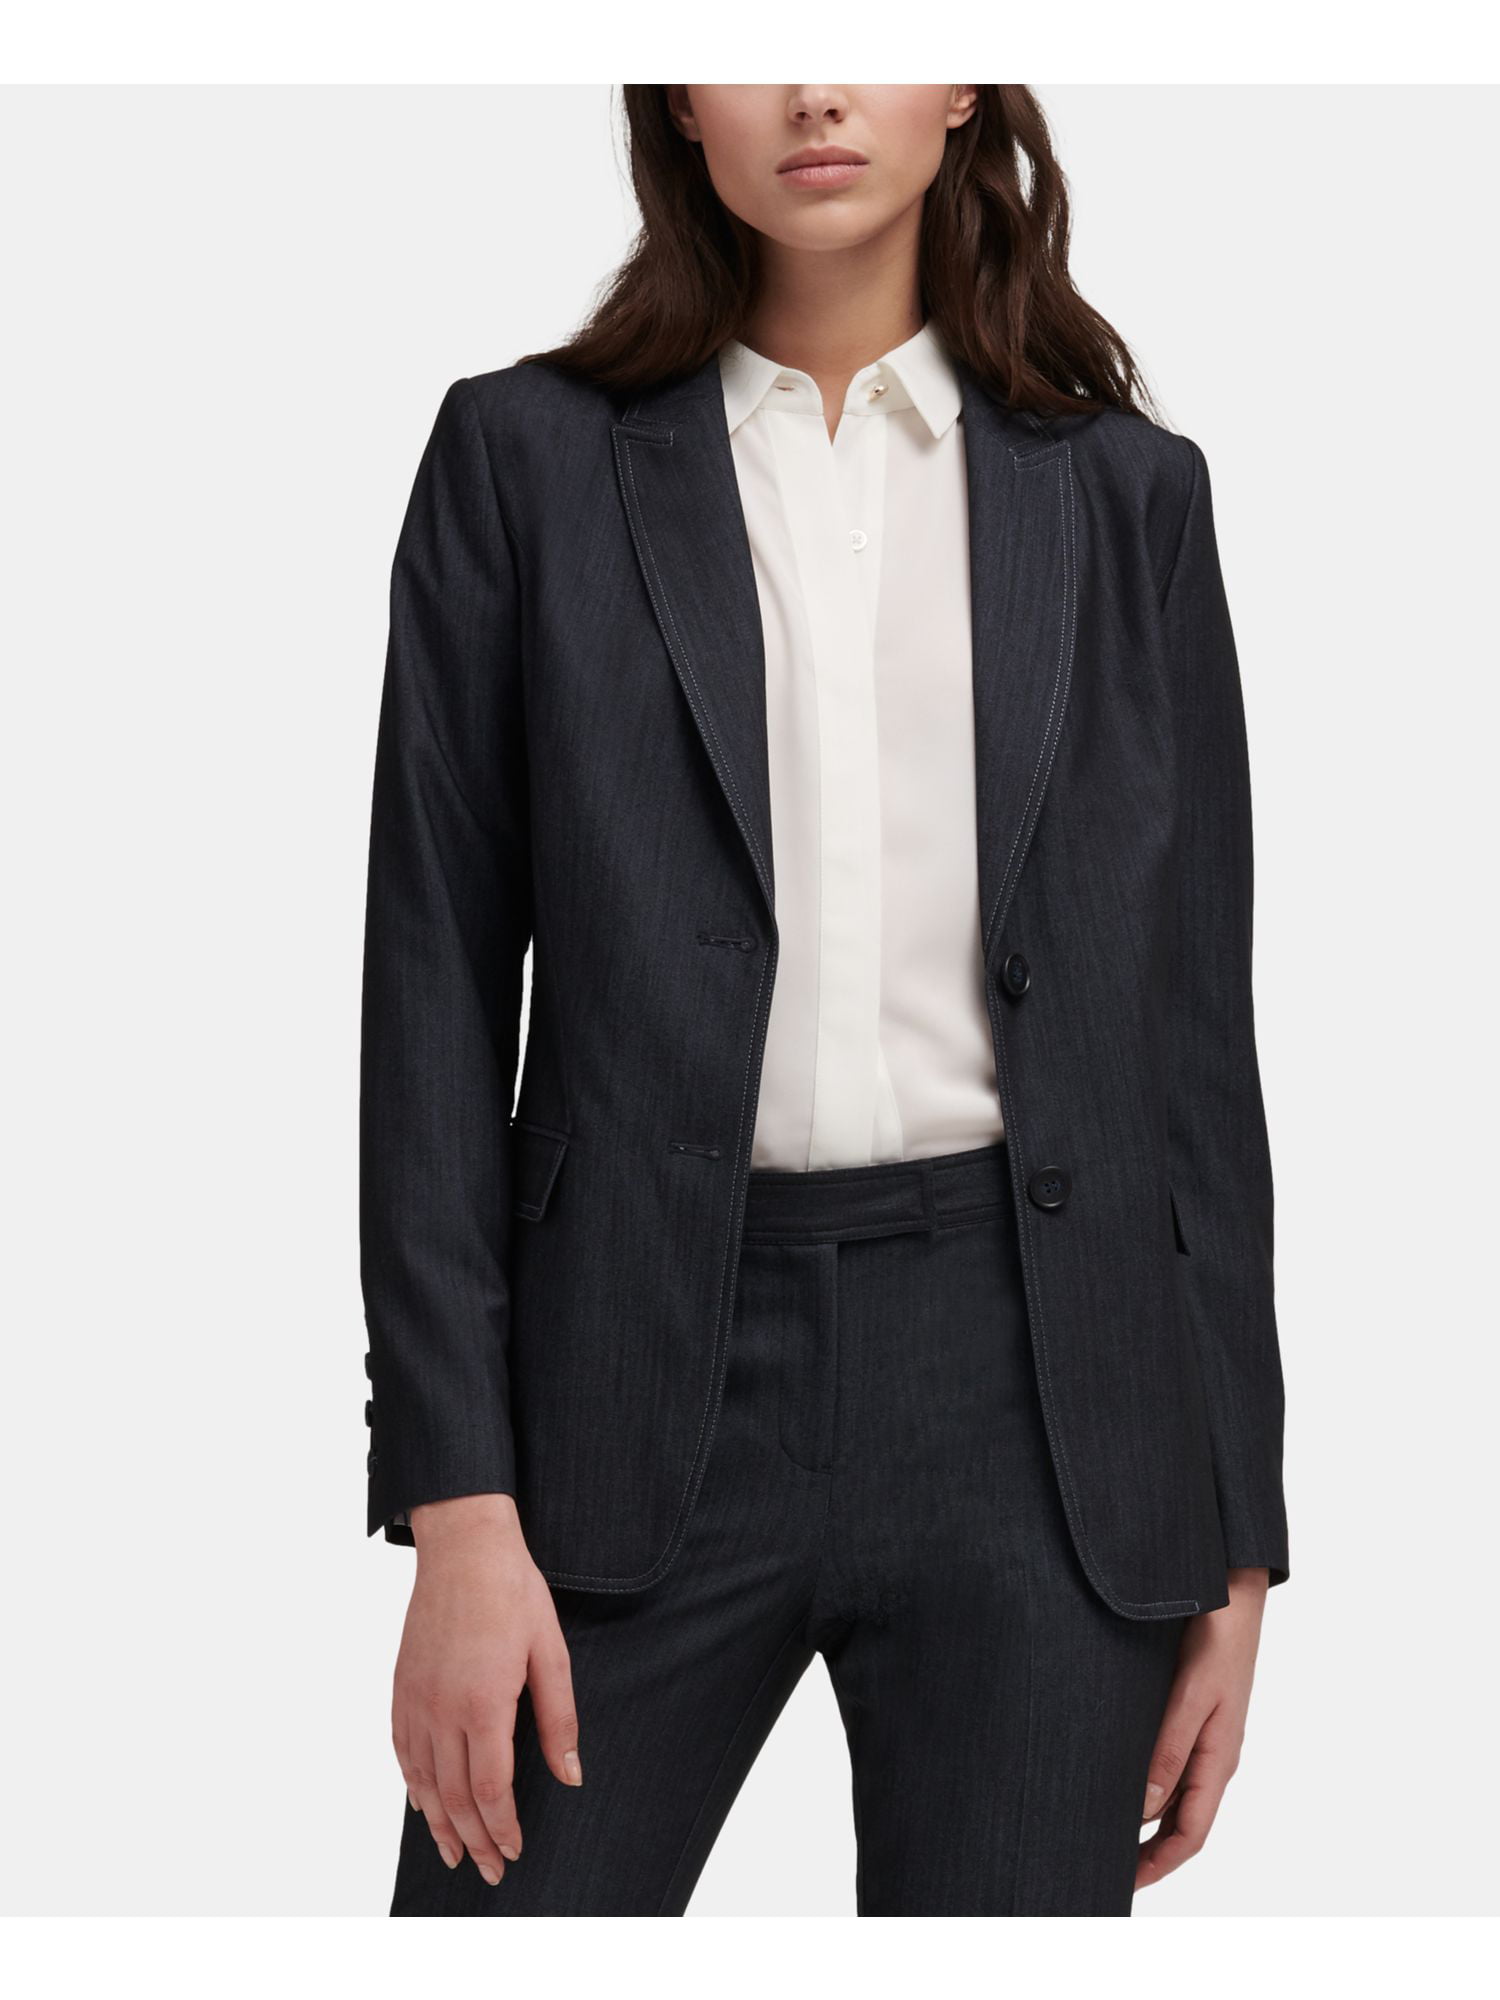 DKNY Womens Collarless One Button Jacket 